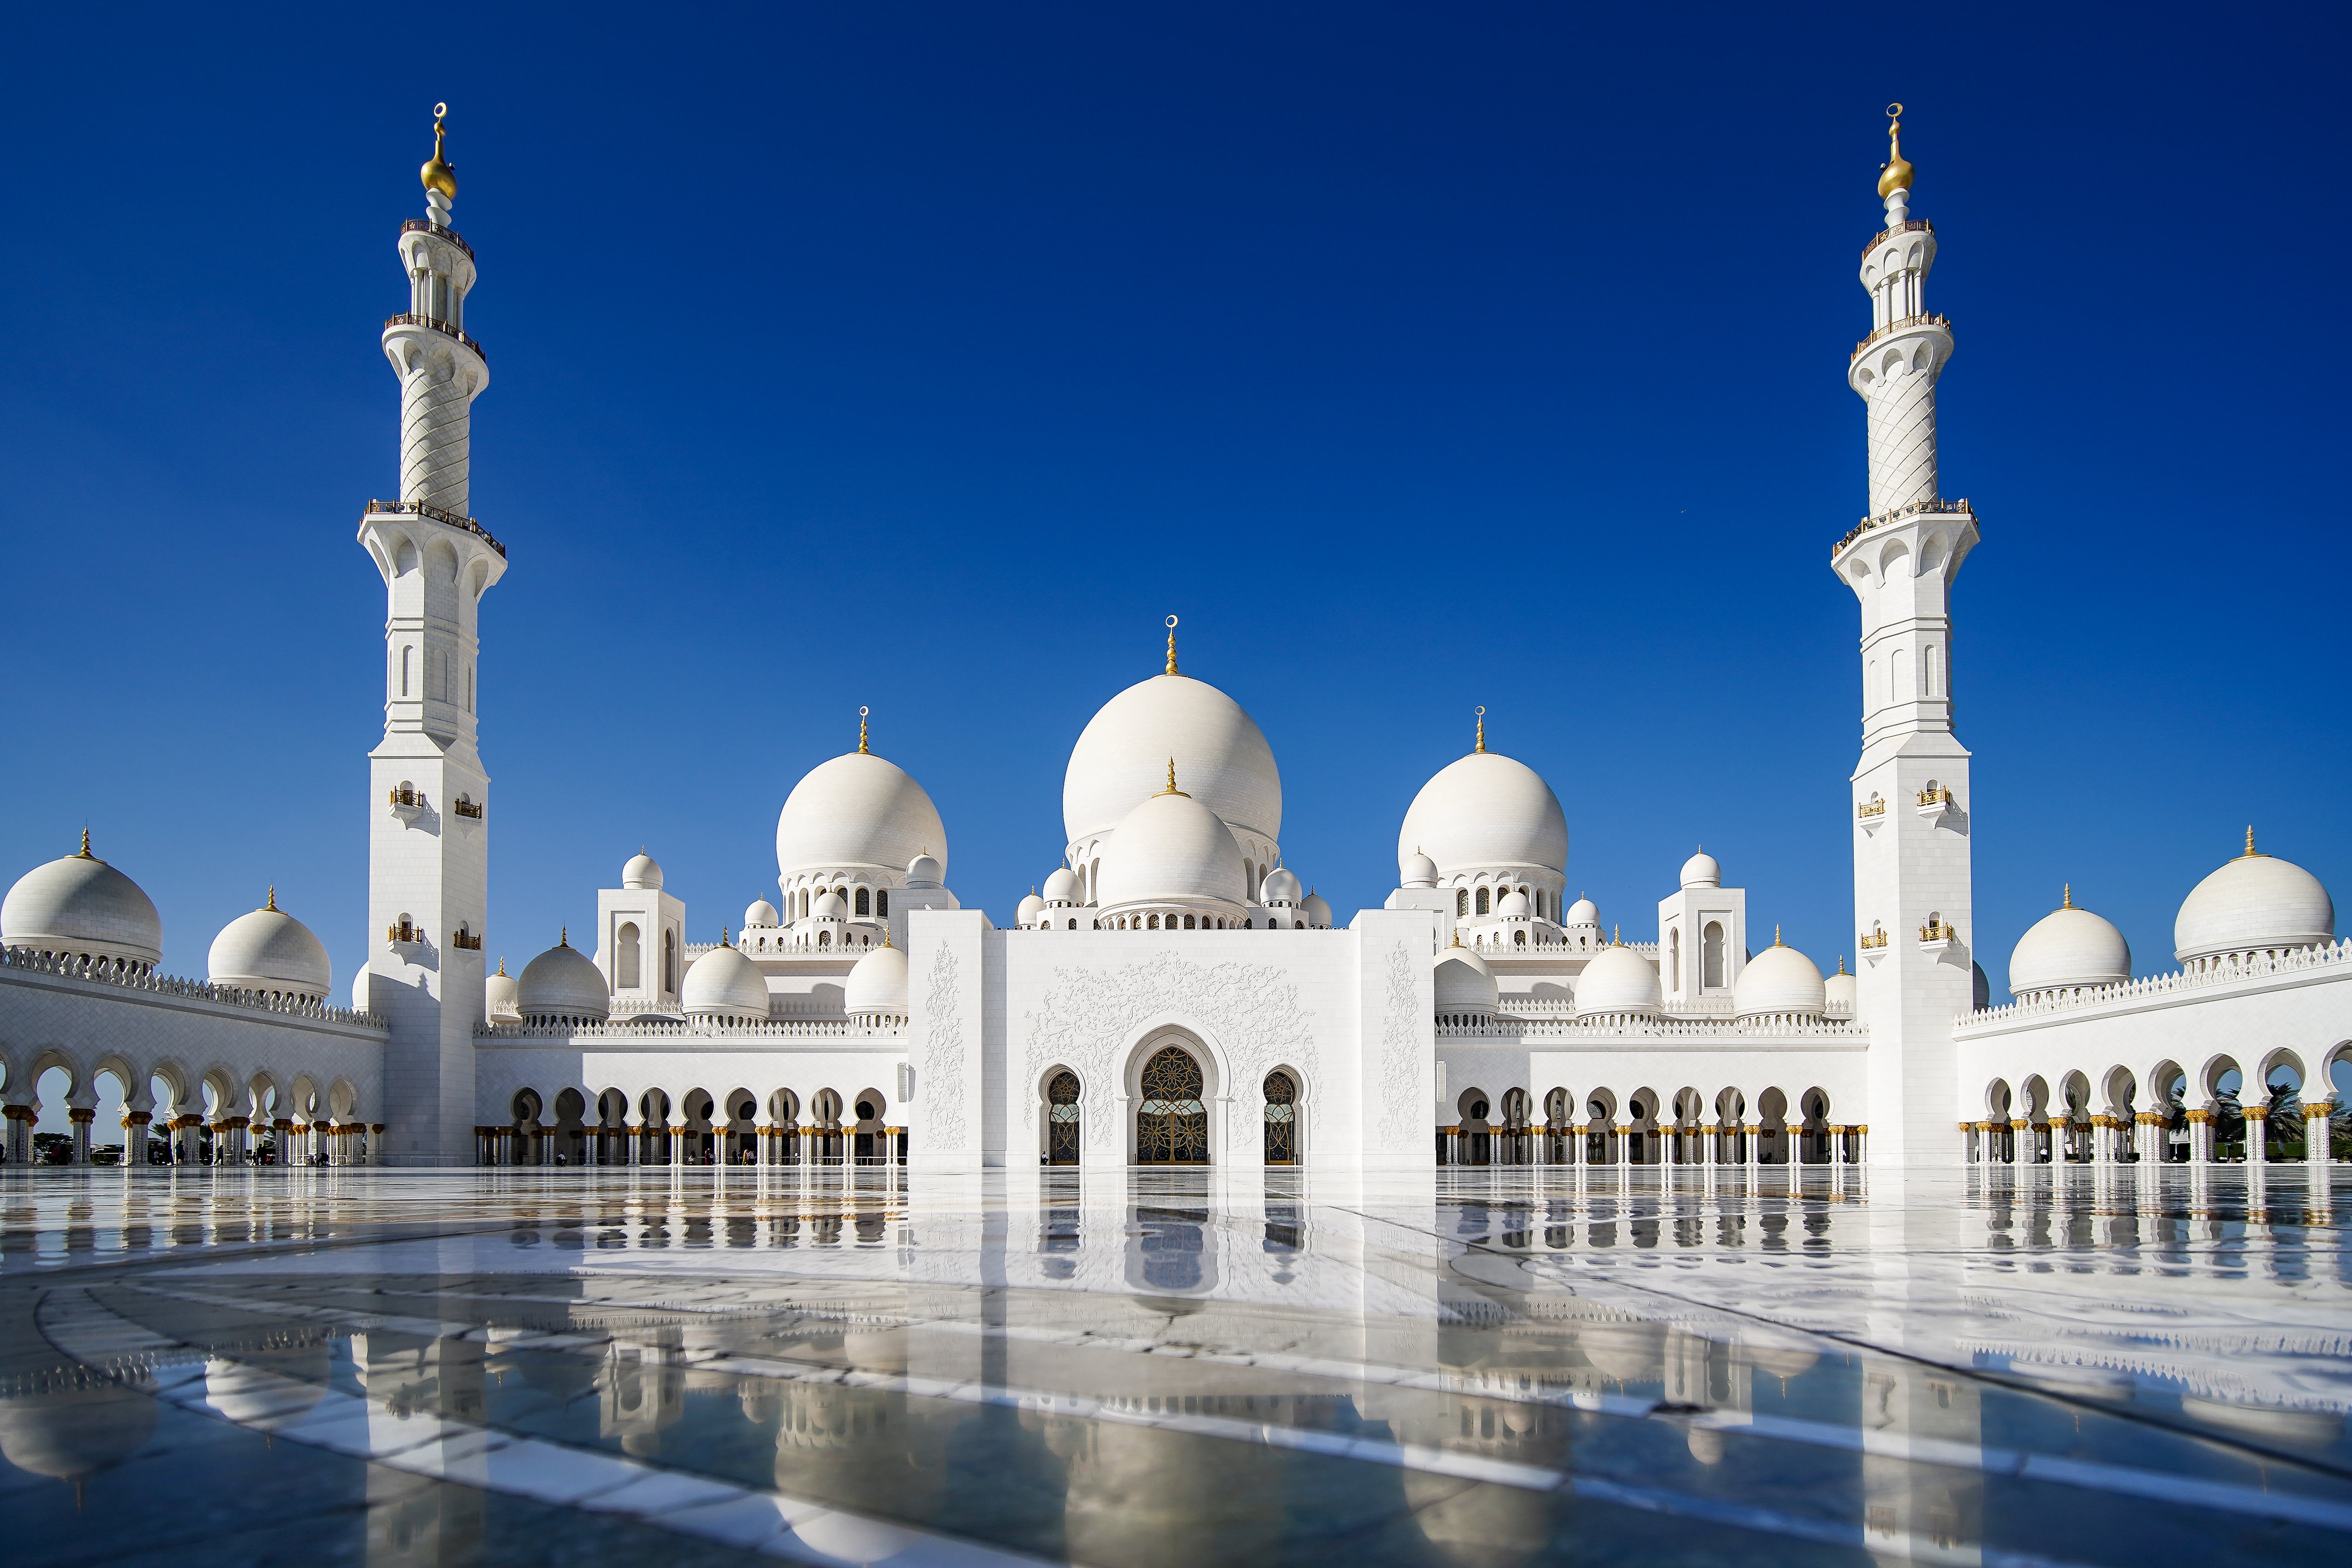 mosque, religious, sheikh zayed grand mosque, abu dhabi, architecture, reflection, sky, united arab emirates, mosques images